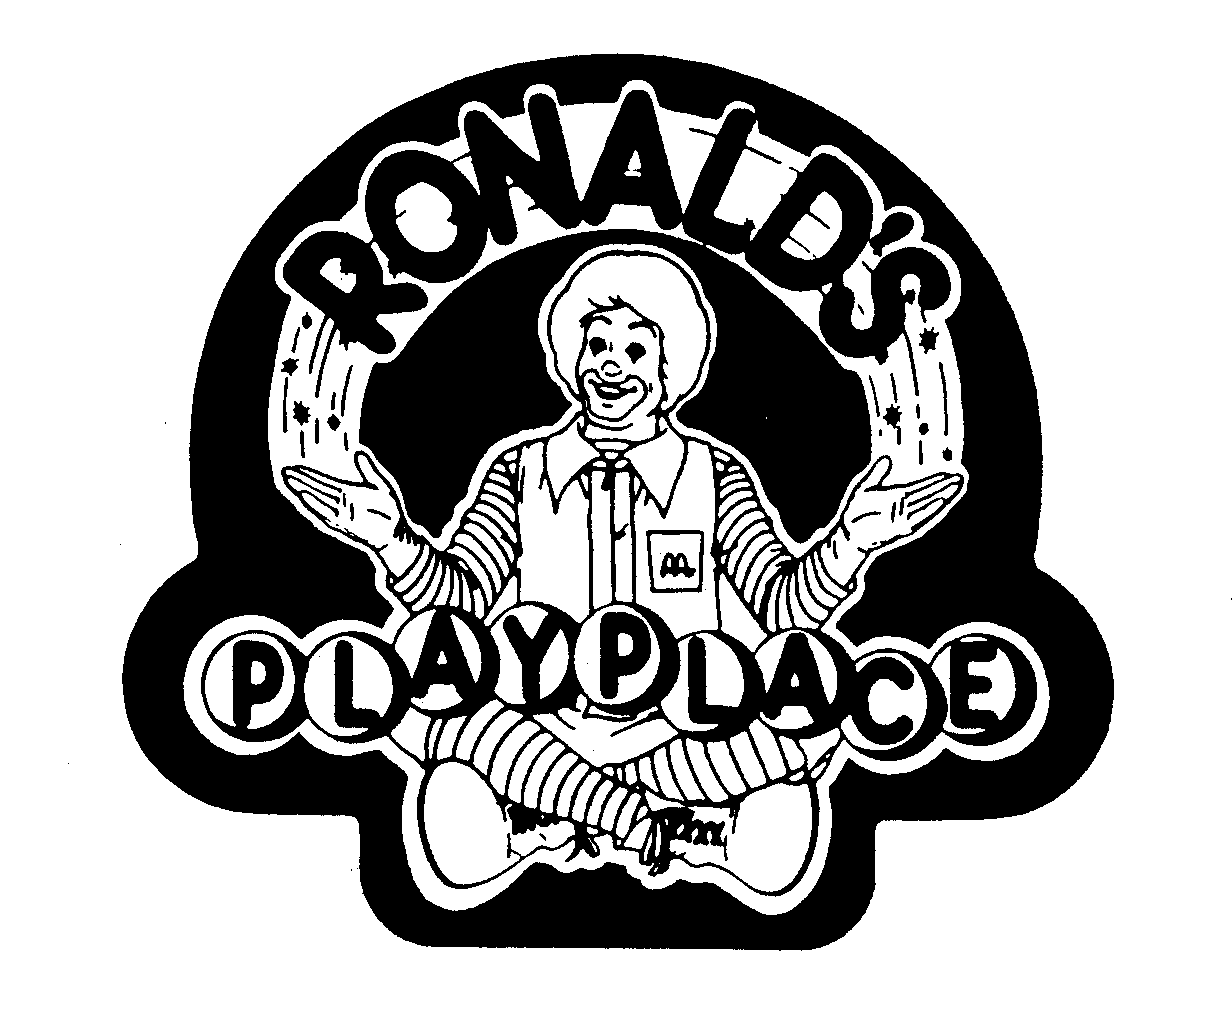  RONALD'S PLAYPLACE